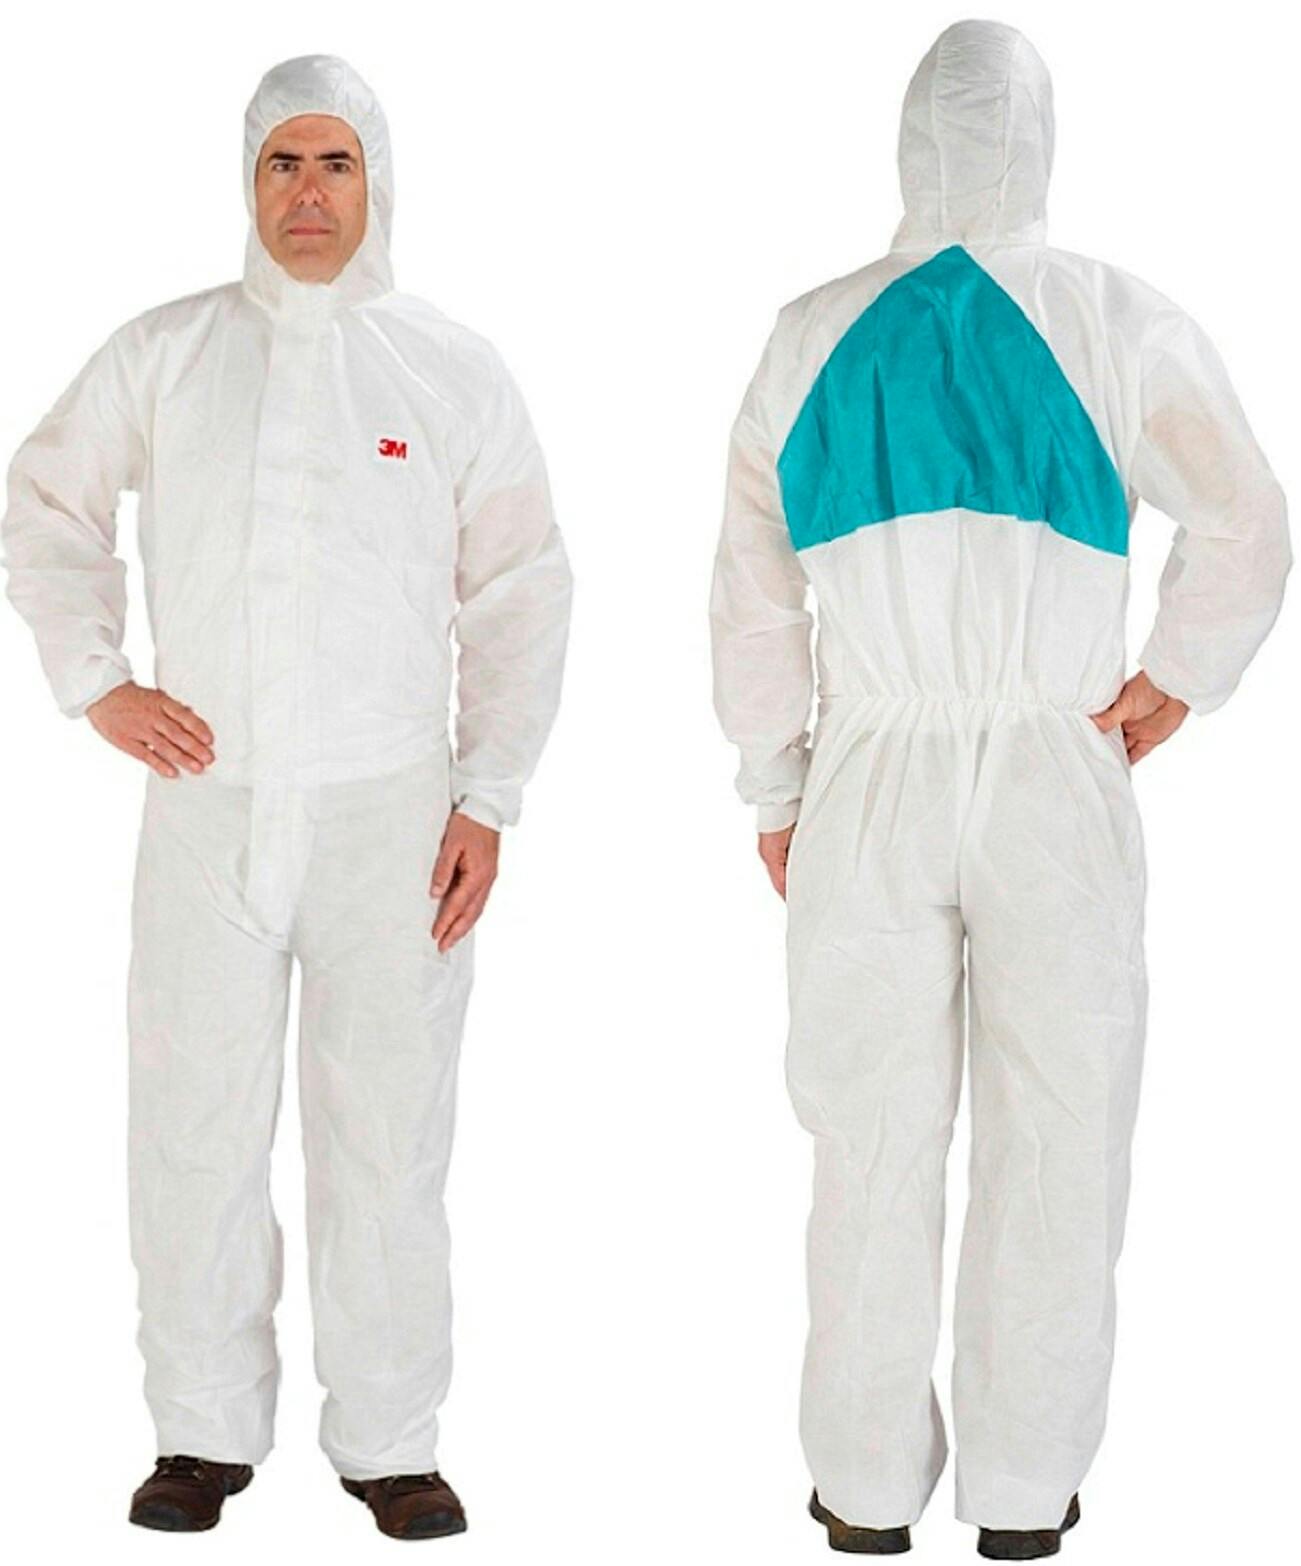 3M™ Protective Coverall 4520 3XL